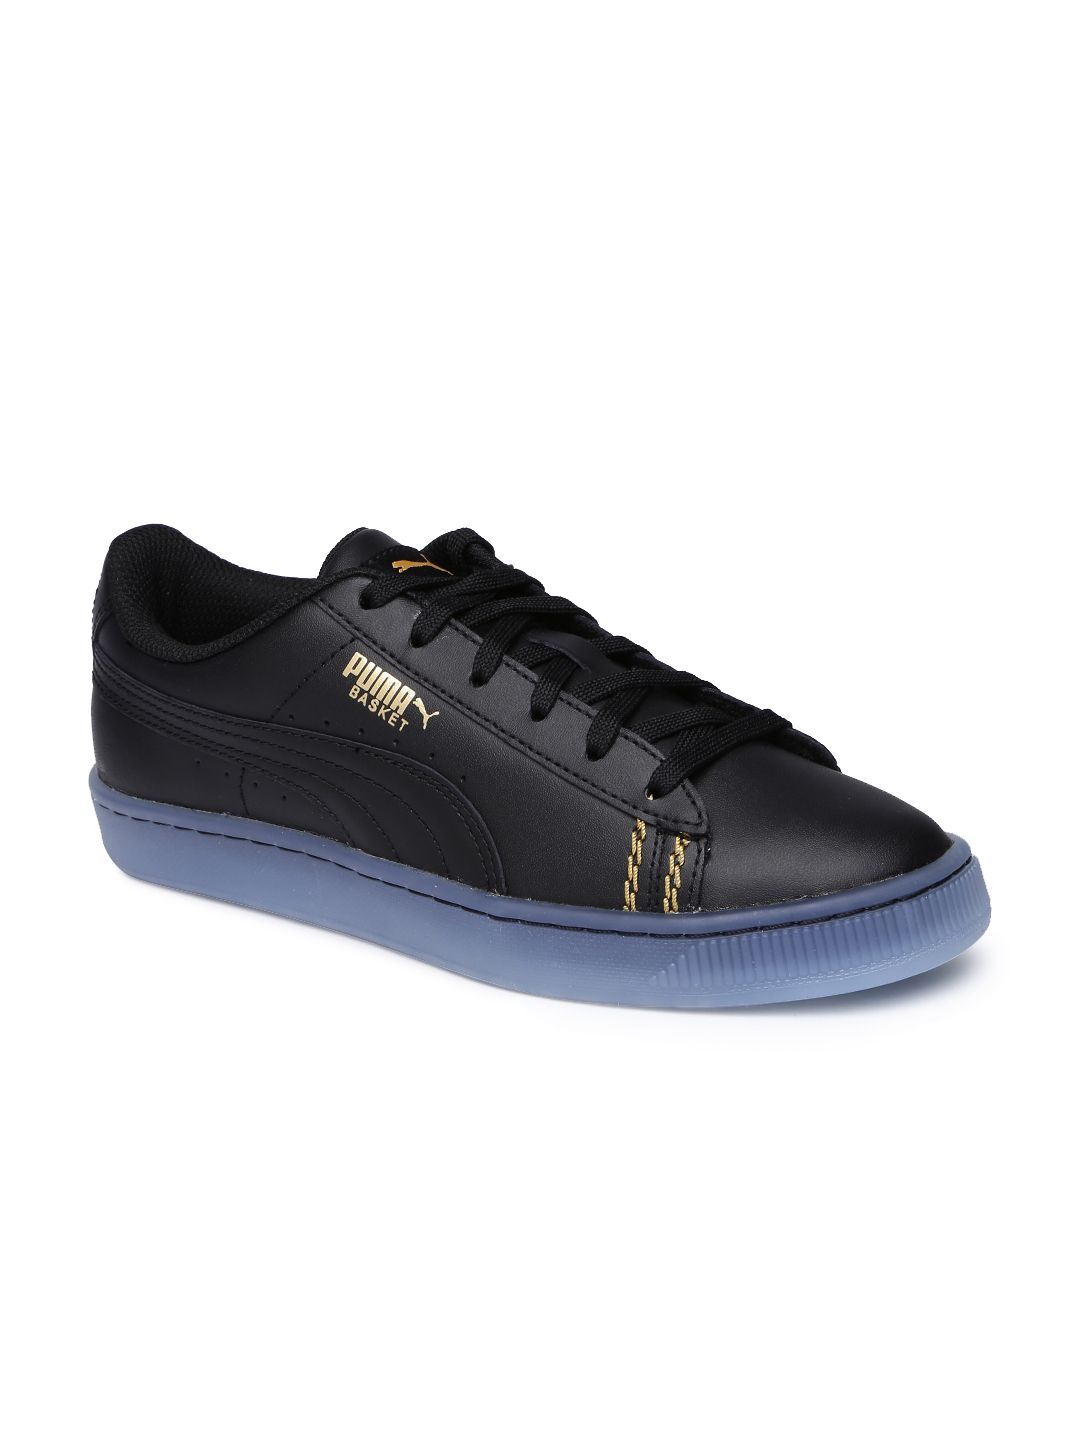 Puma Unisex Black Basket Classic one8 Leather Sneakers Price in India